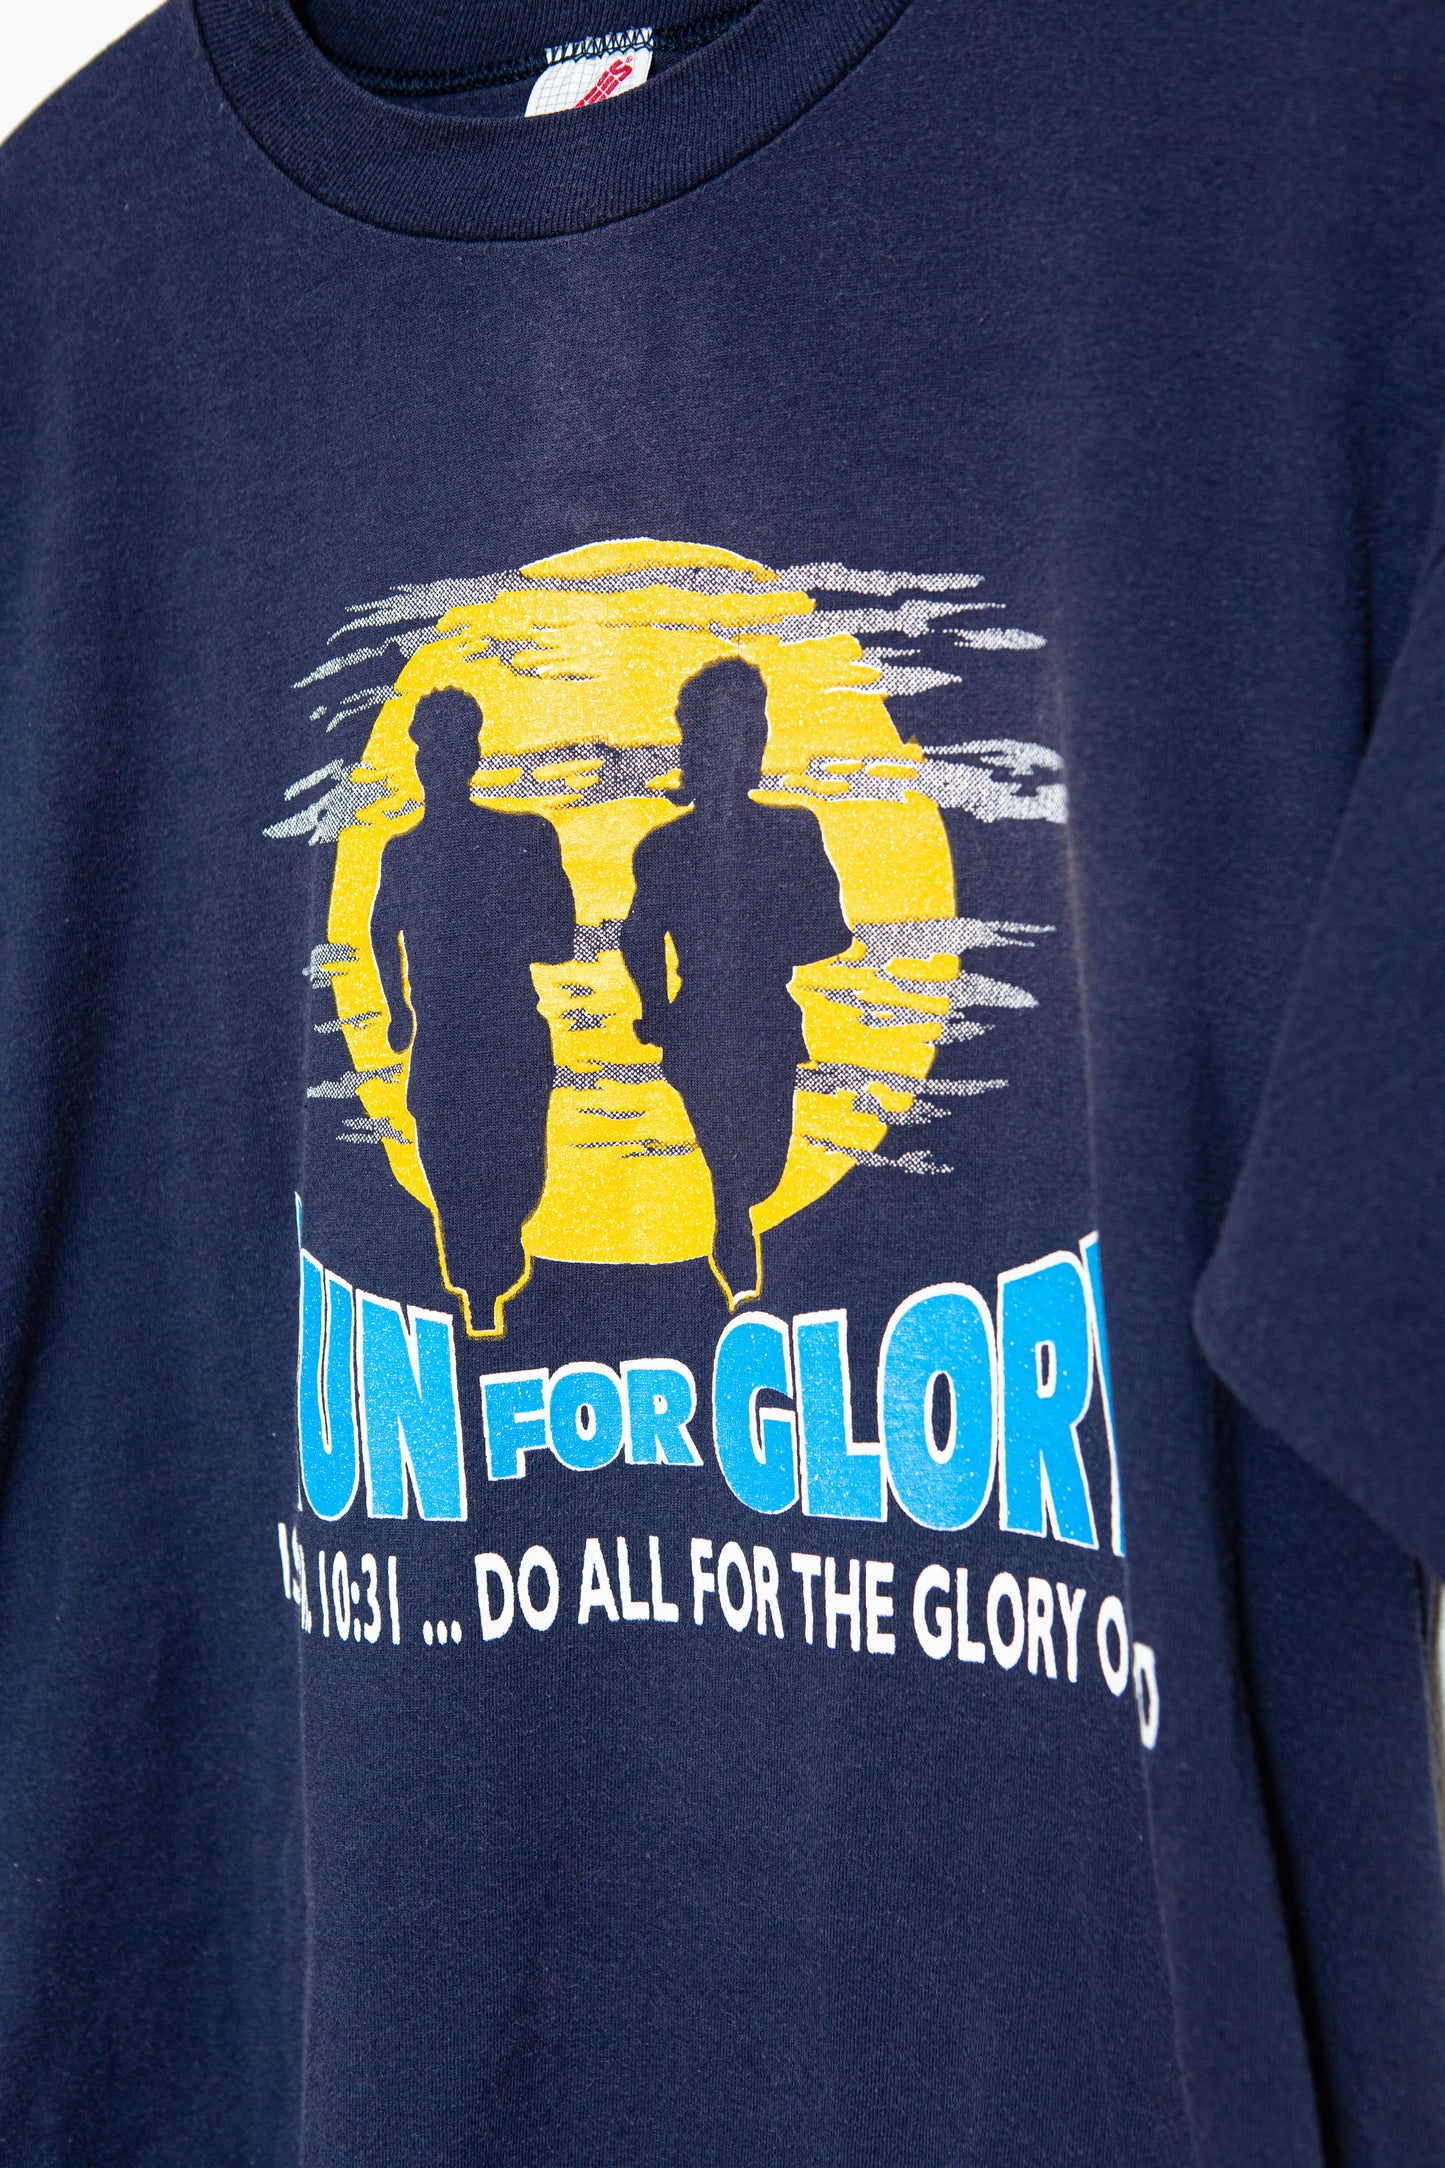 Vintage "Run for Glory" T-shirt